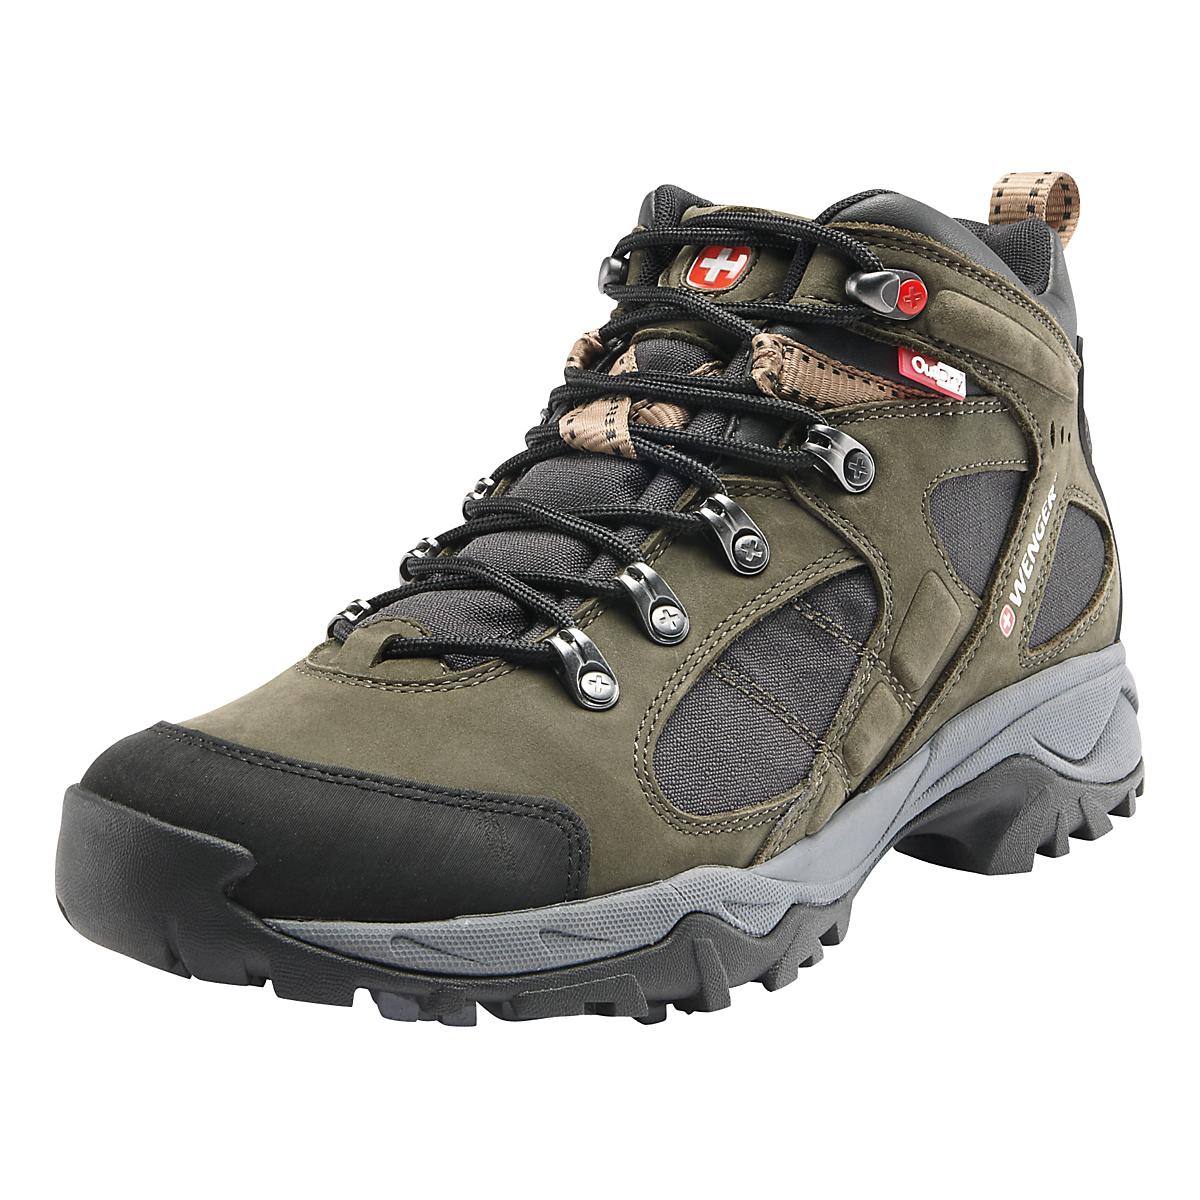 Mens Wenger Swiss Army Xpedition Hiking Shoe at Road Runner Sports